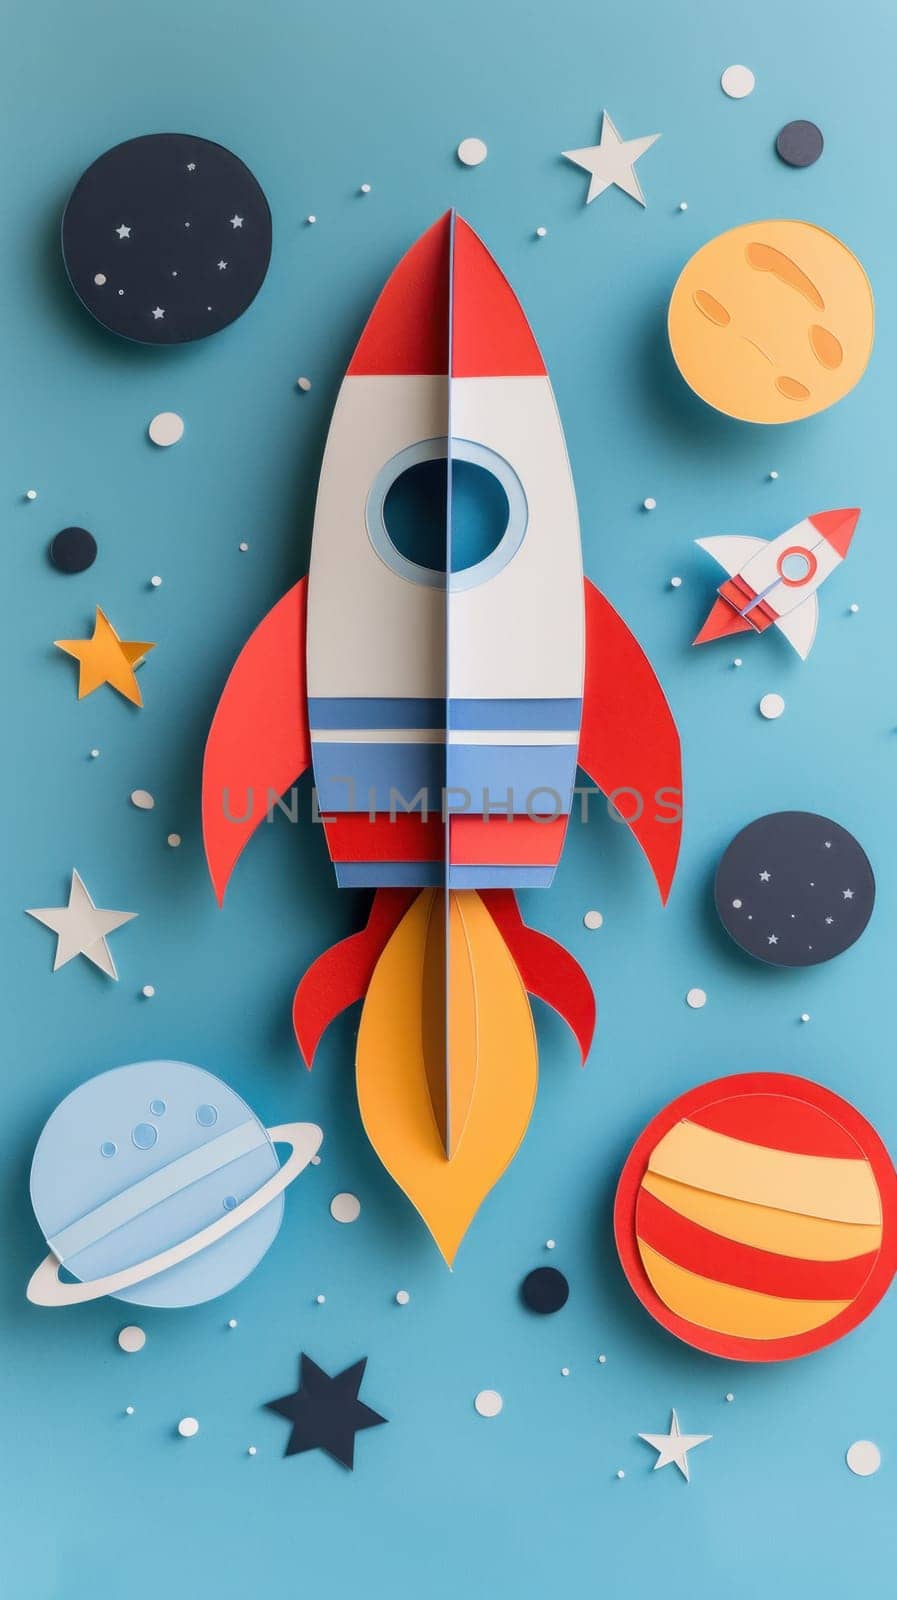 A paper rocket is flying through space with planets and stars surrounding it by golfmerrymaker